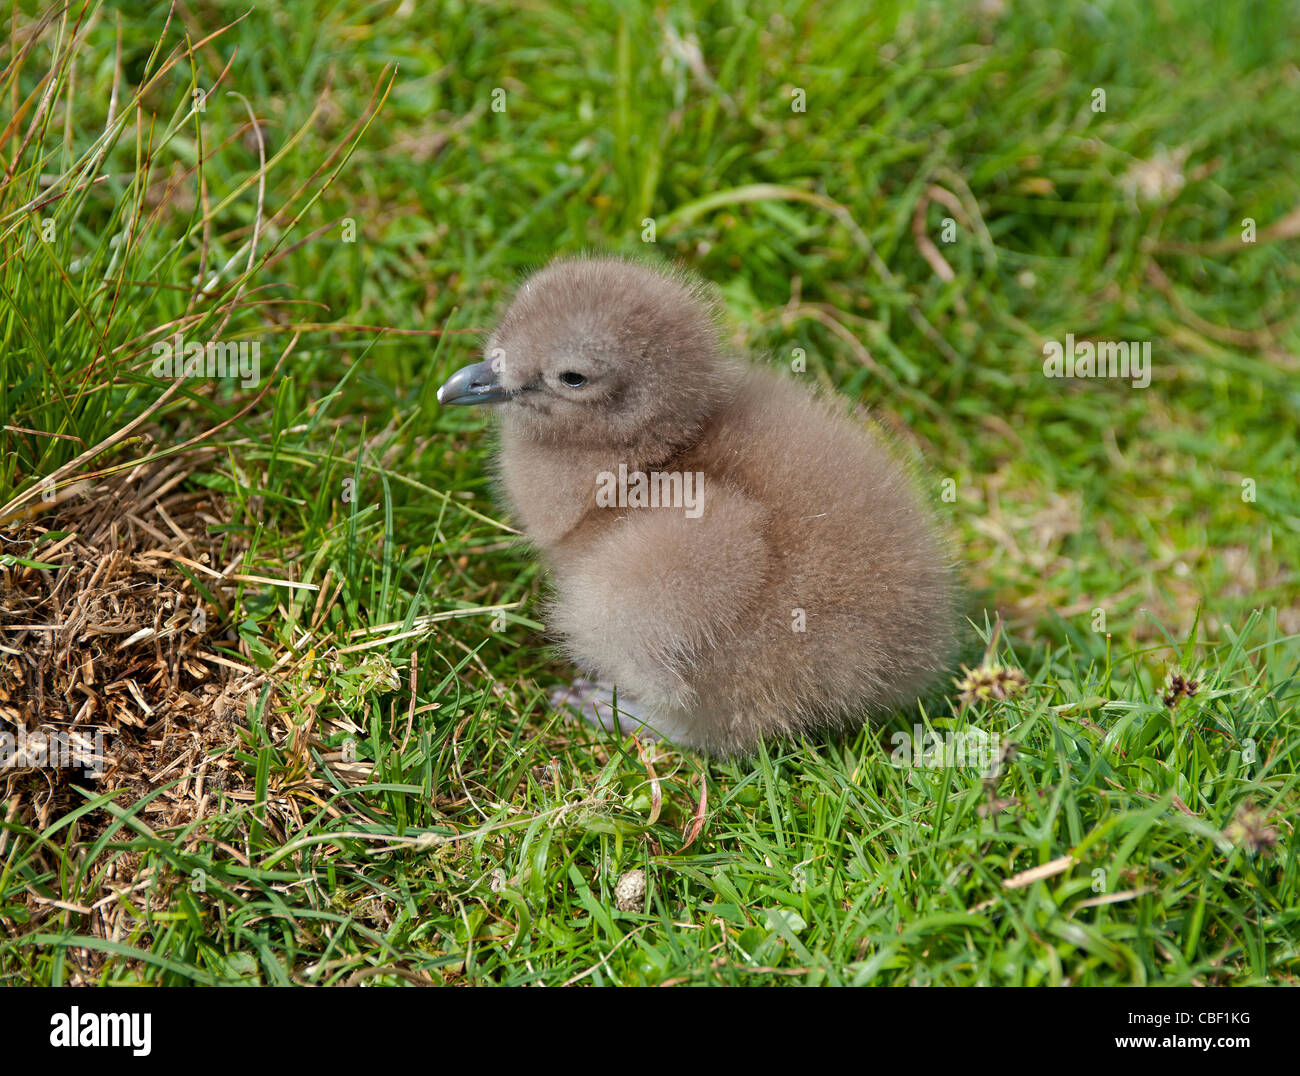 A Great Skua or Bonxie chick at two days old by its Isle of Noss, Shetland nest site  SCO 7759 Stock Photo